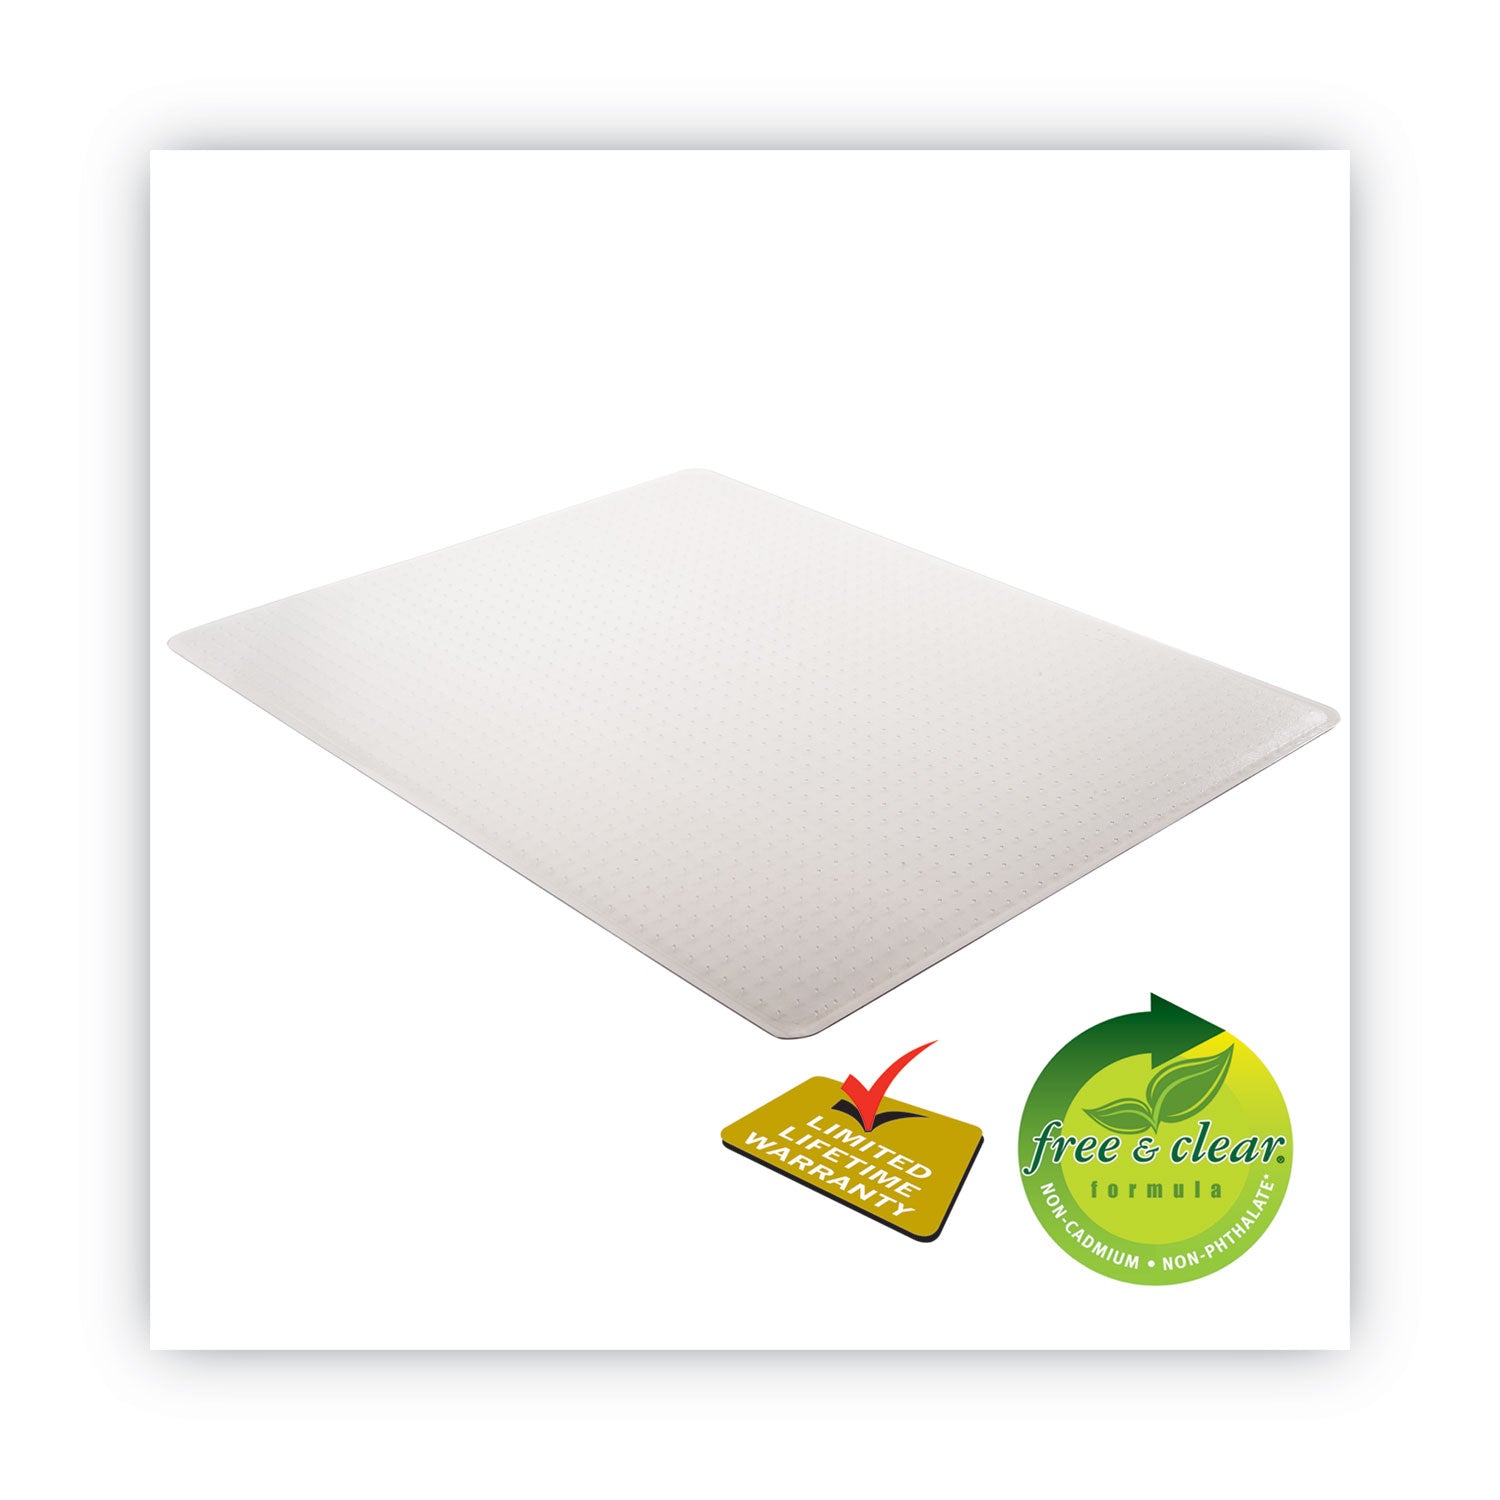 supermat-frequent-use-chair-mat-med-pile-carpet-roll-46-x-60-rectangle-clear_defcm14443fcom - 6